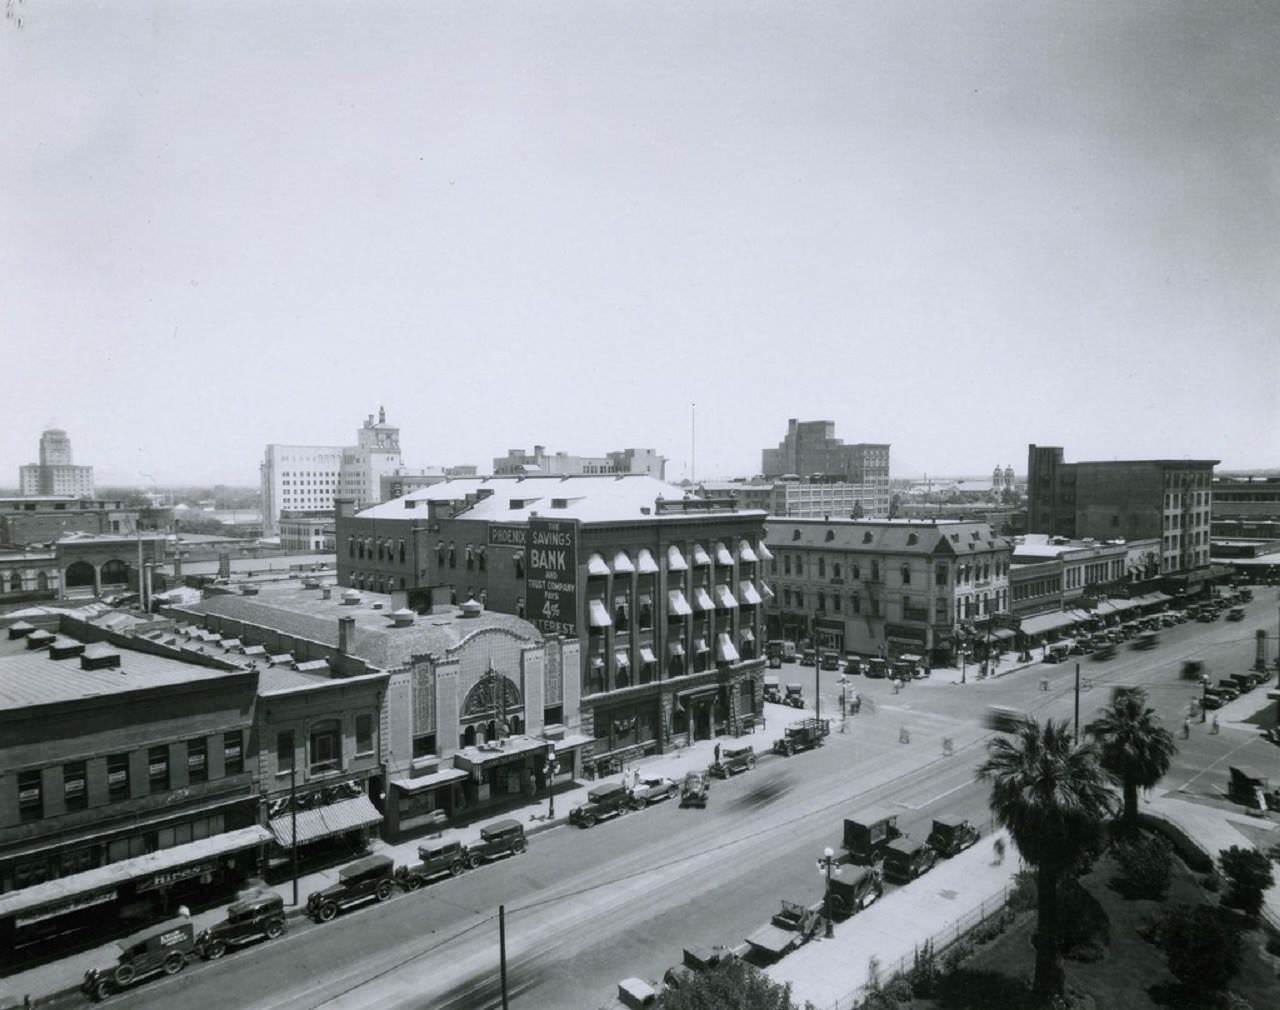 A skyline shot in 1929 of First Avenue and Washington, taken from the new City-County Building. The intersection shows the Fleming Building and the Monohon Building.